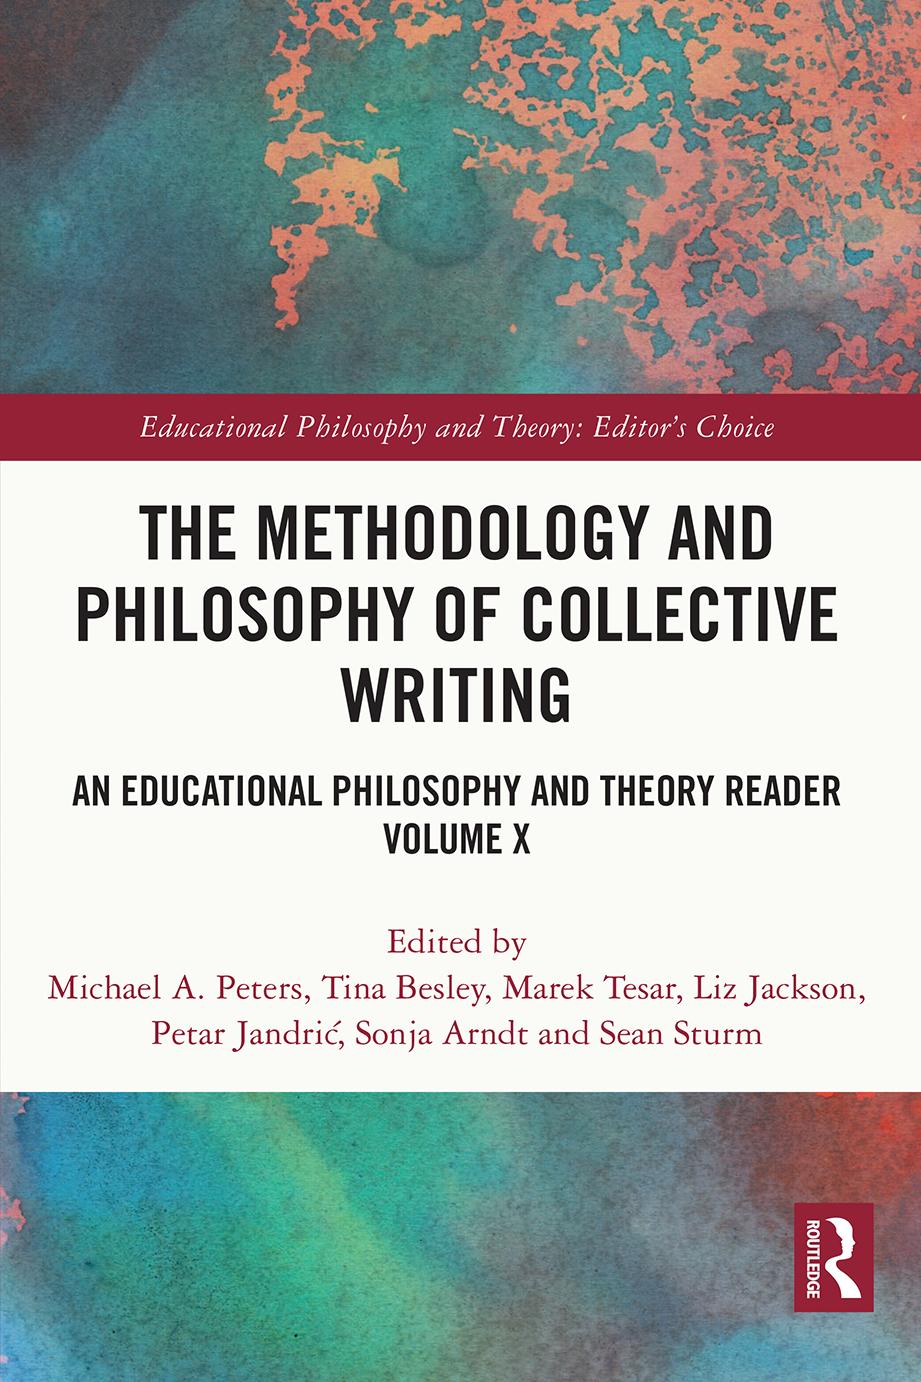 The methodology and philosophy of collective writing